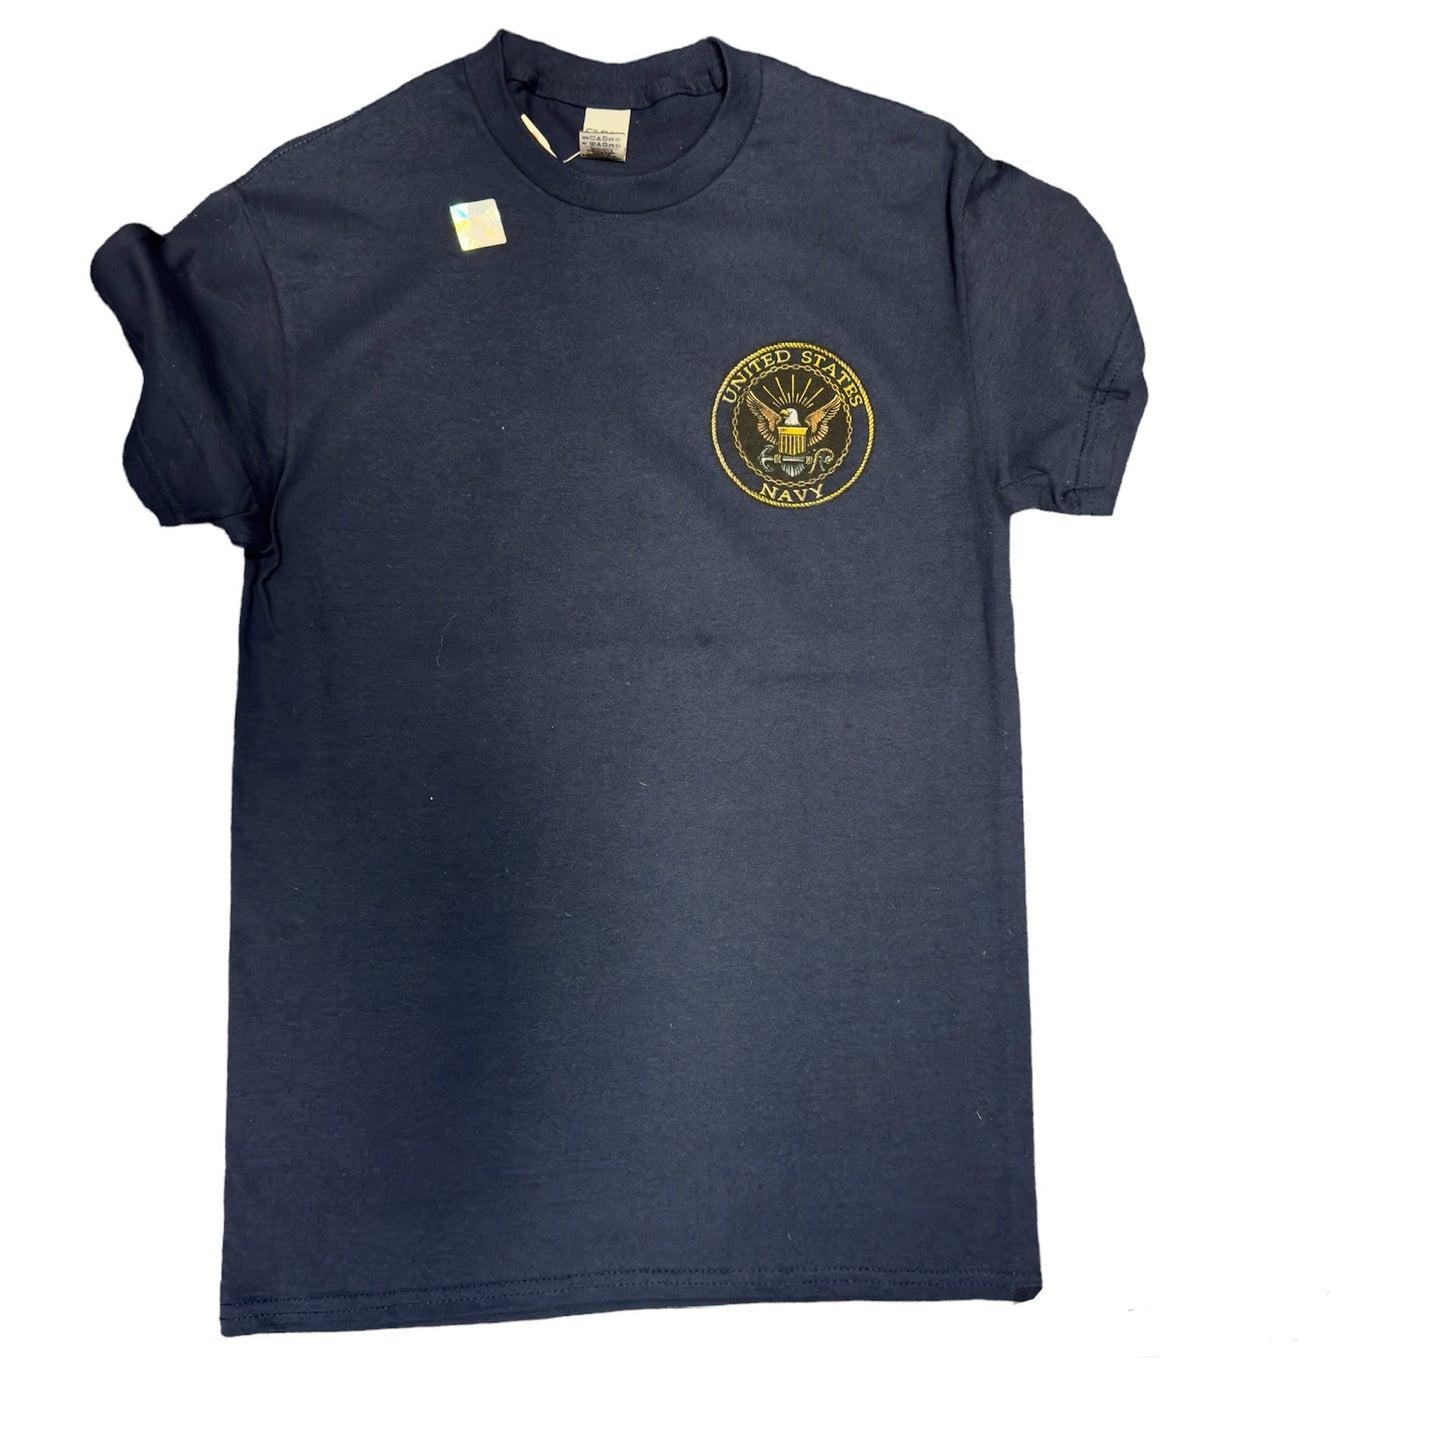 NAVY Proud to Have Served T-shirt